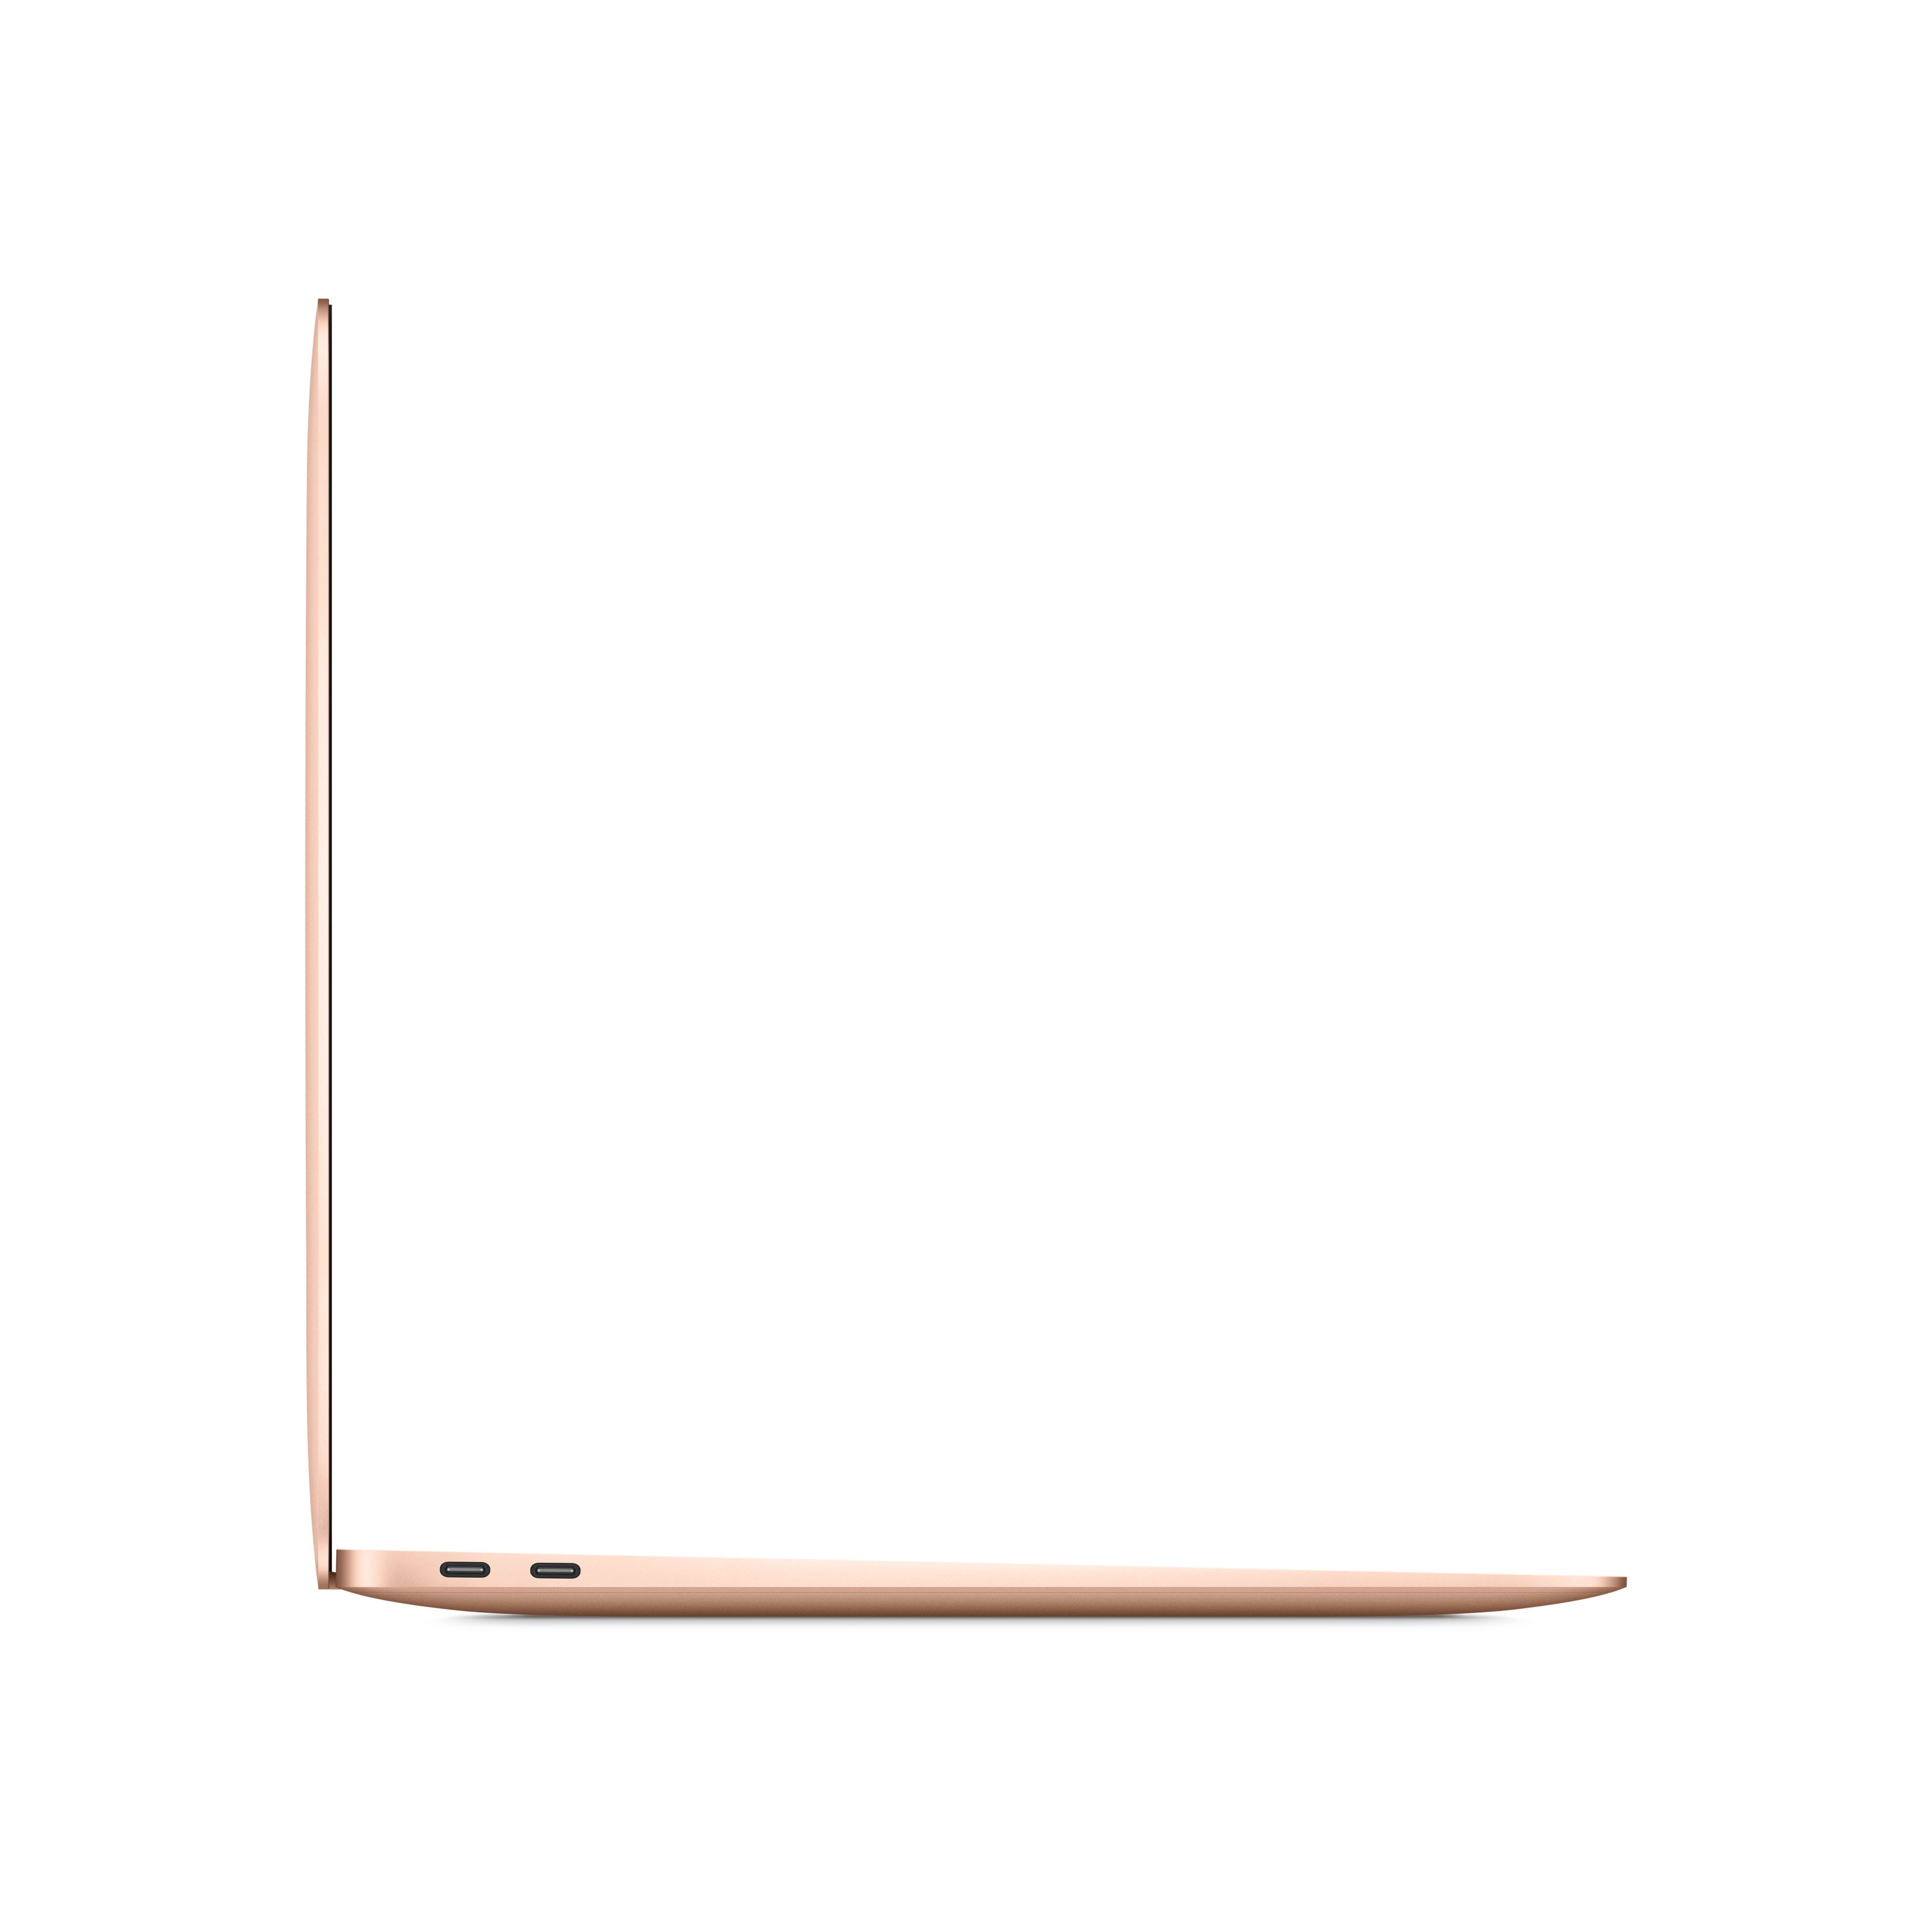 'Apple 13-inch MacBook Air: Apple M1 chip with 8-core CPU and 7-core GPU 256GB - Gold  מחשב נייד אייקון גרופ '